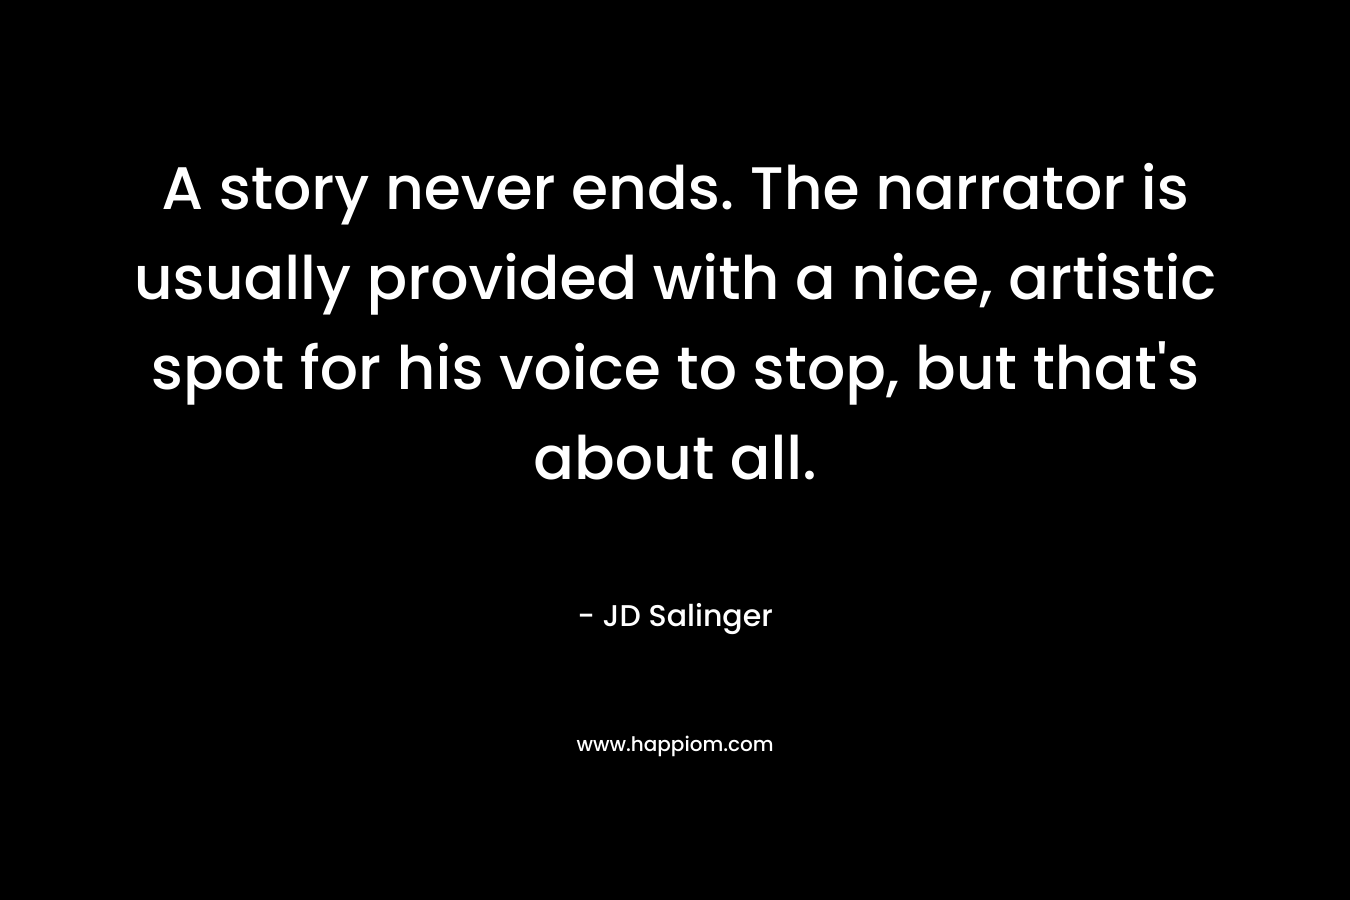 A story never ends. The narrator is usually provided with a nice, artistic spot for his voice to stop, but that's about all.